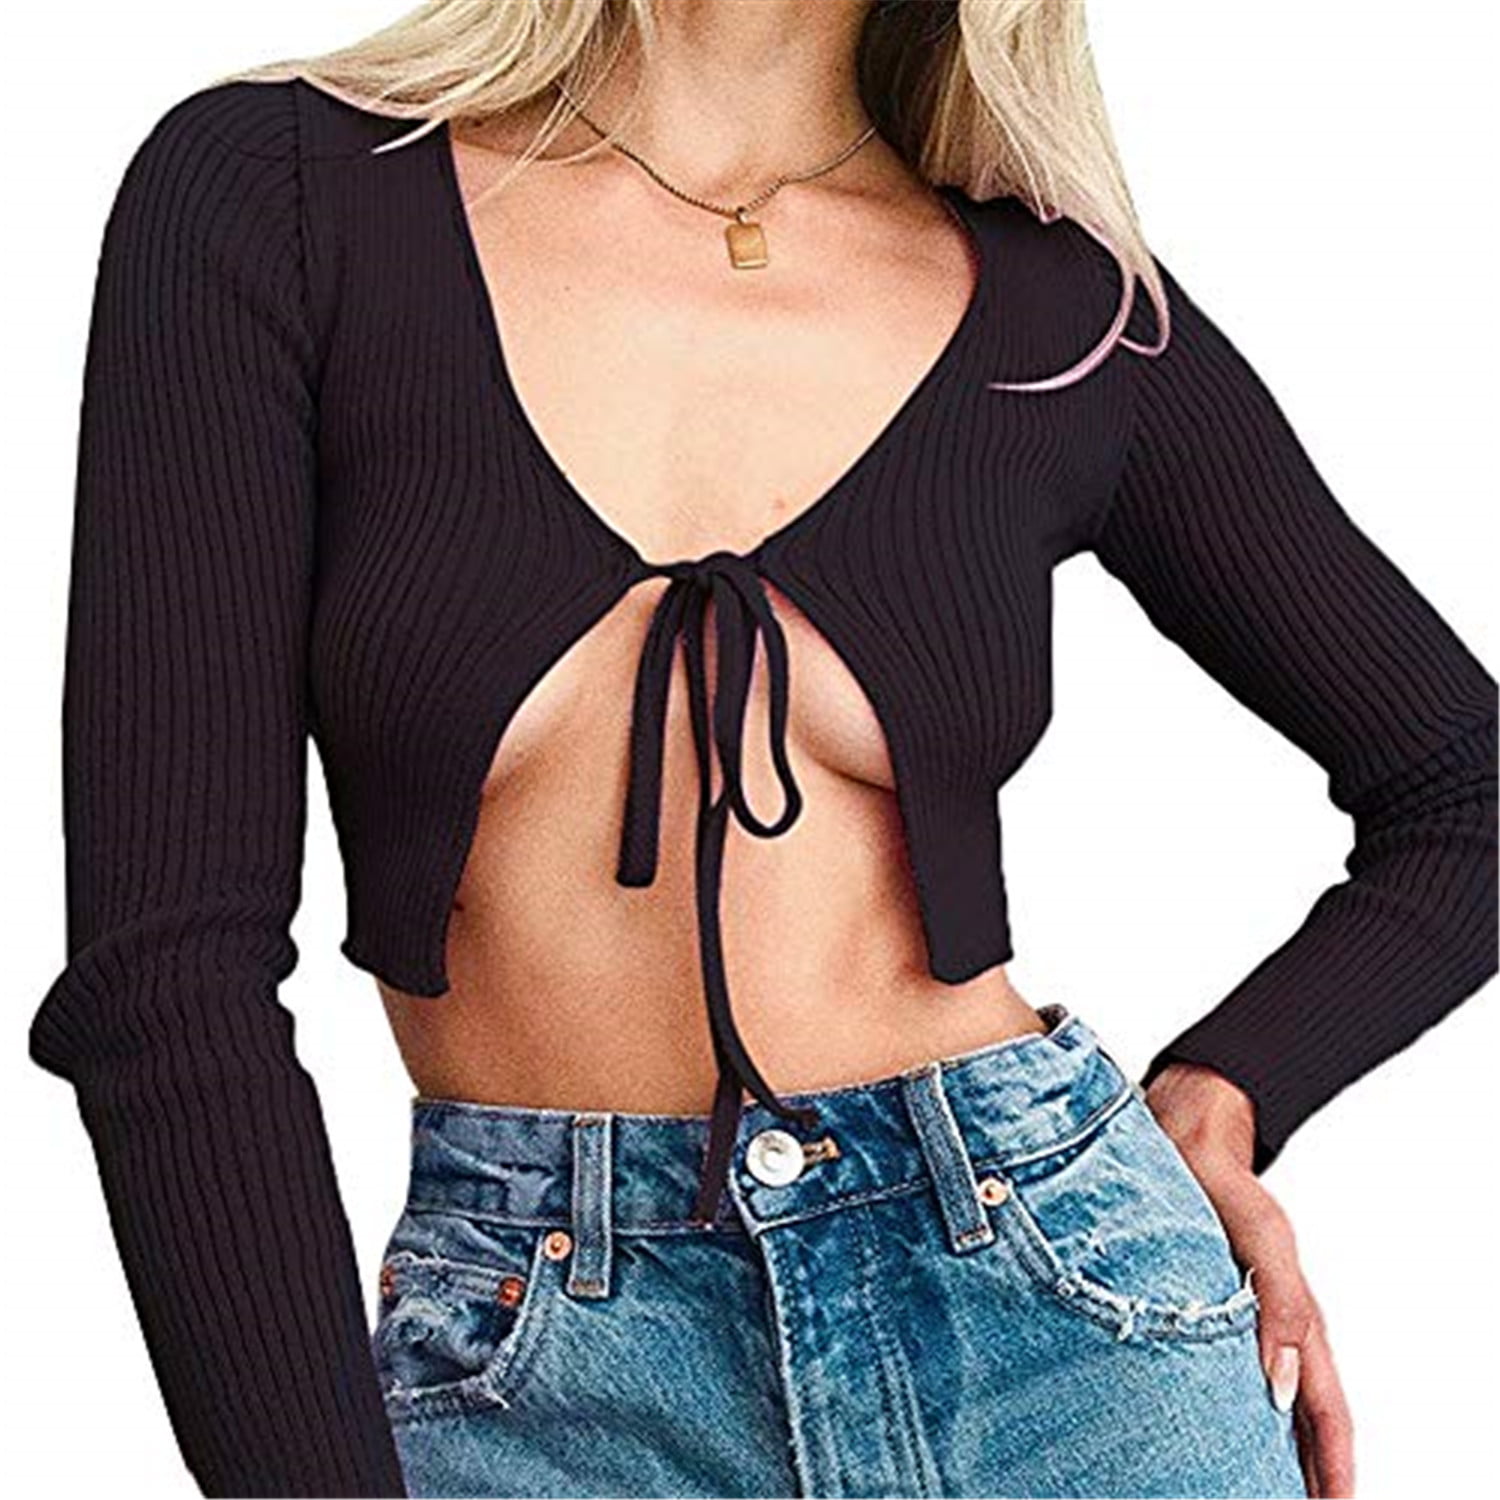 Designer Fashion Women Big Pearl Handmade Camisole Crop Top Sexy Deep V  Neck See Throuth Going Out Beach Nightclub Camis Tops - AliExpress